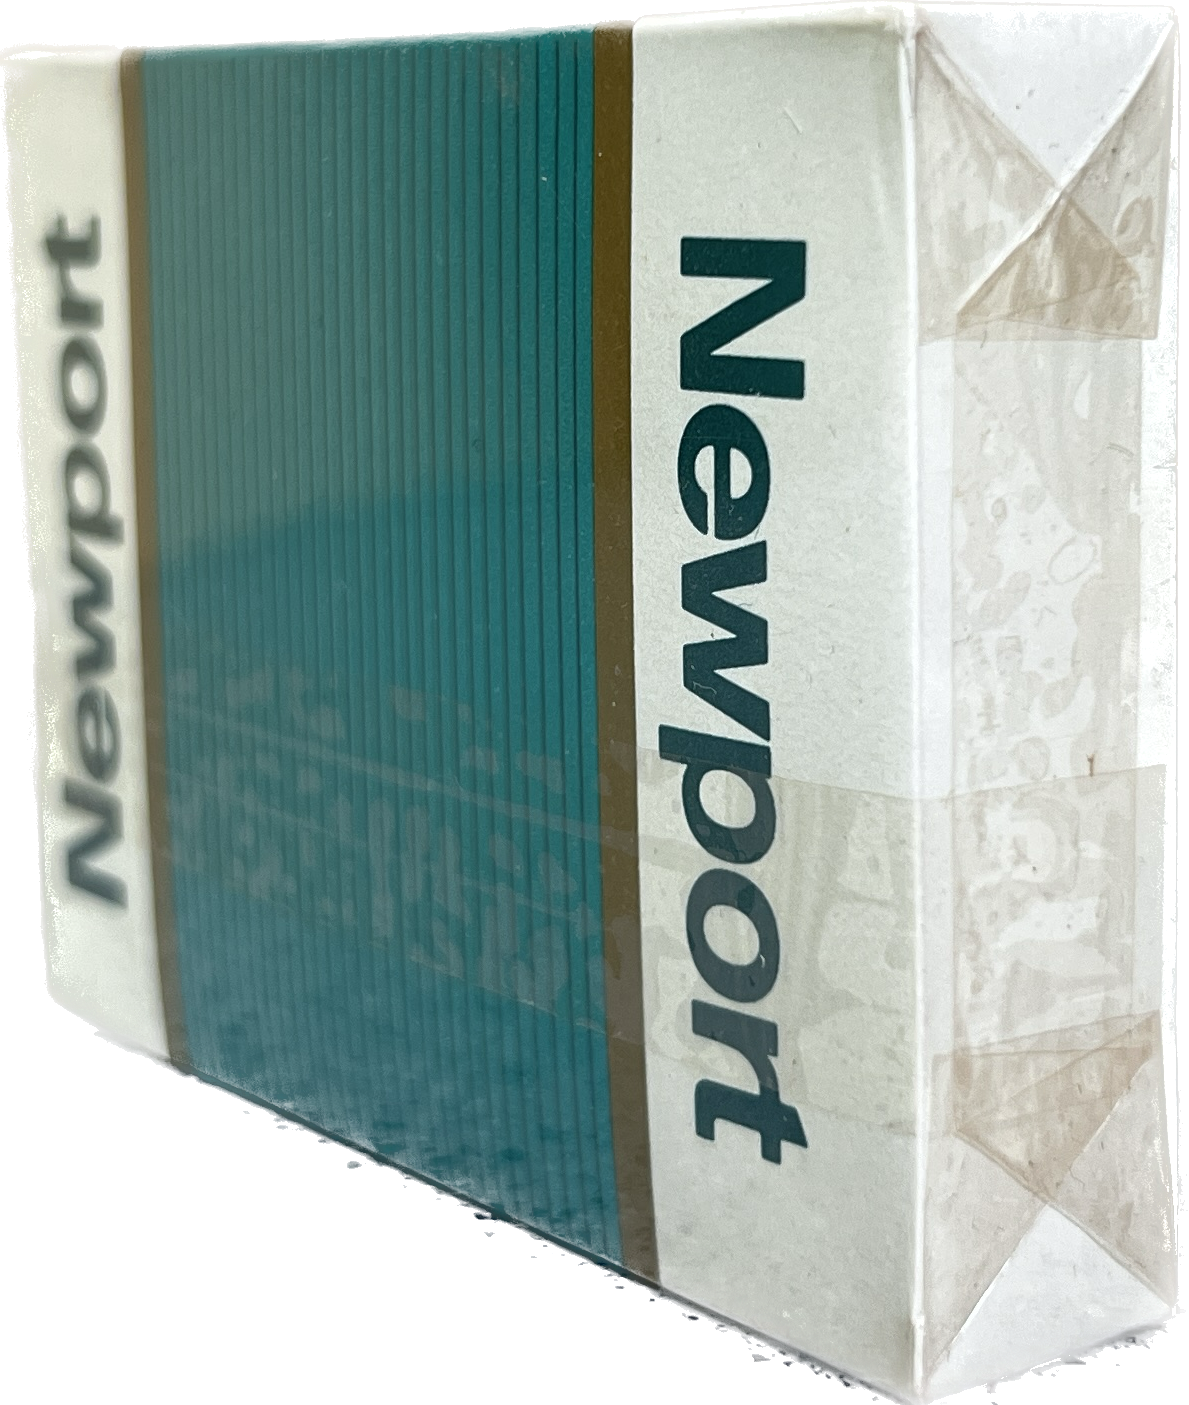 Newport Promotional Playing Cards